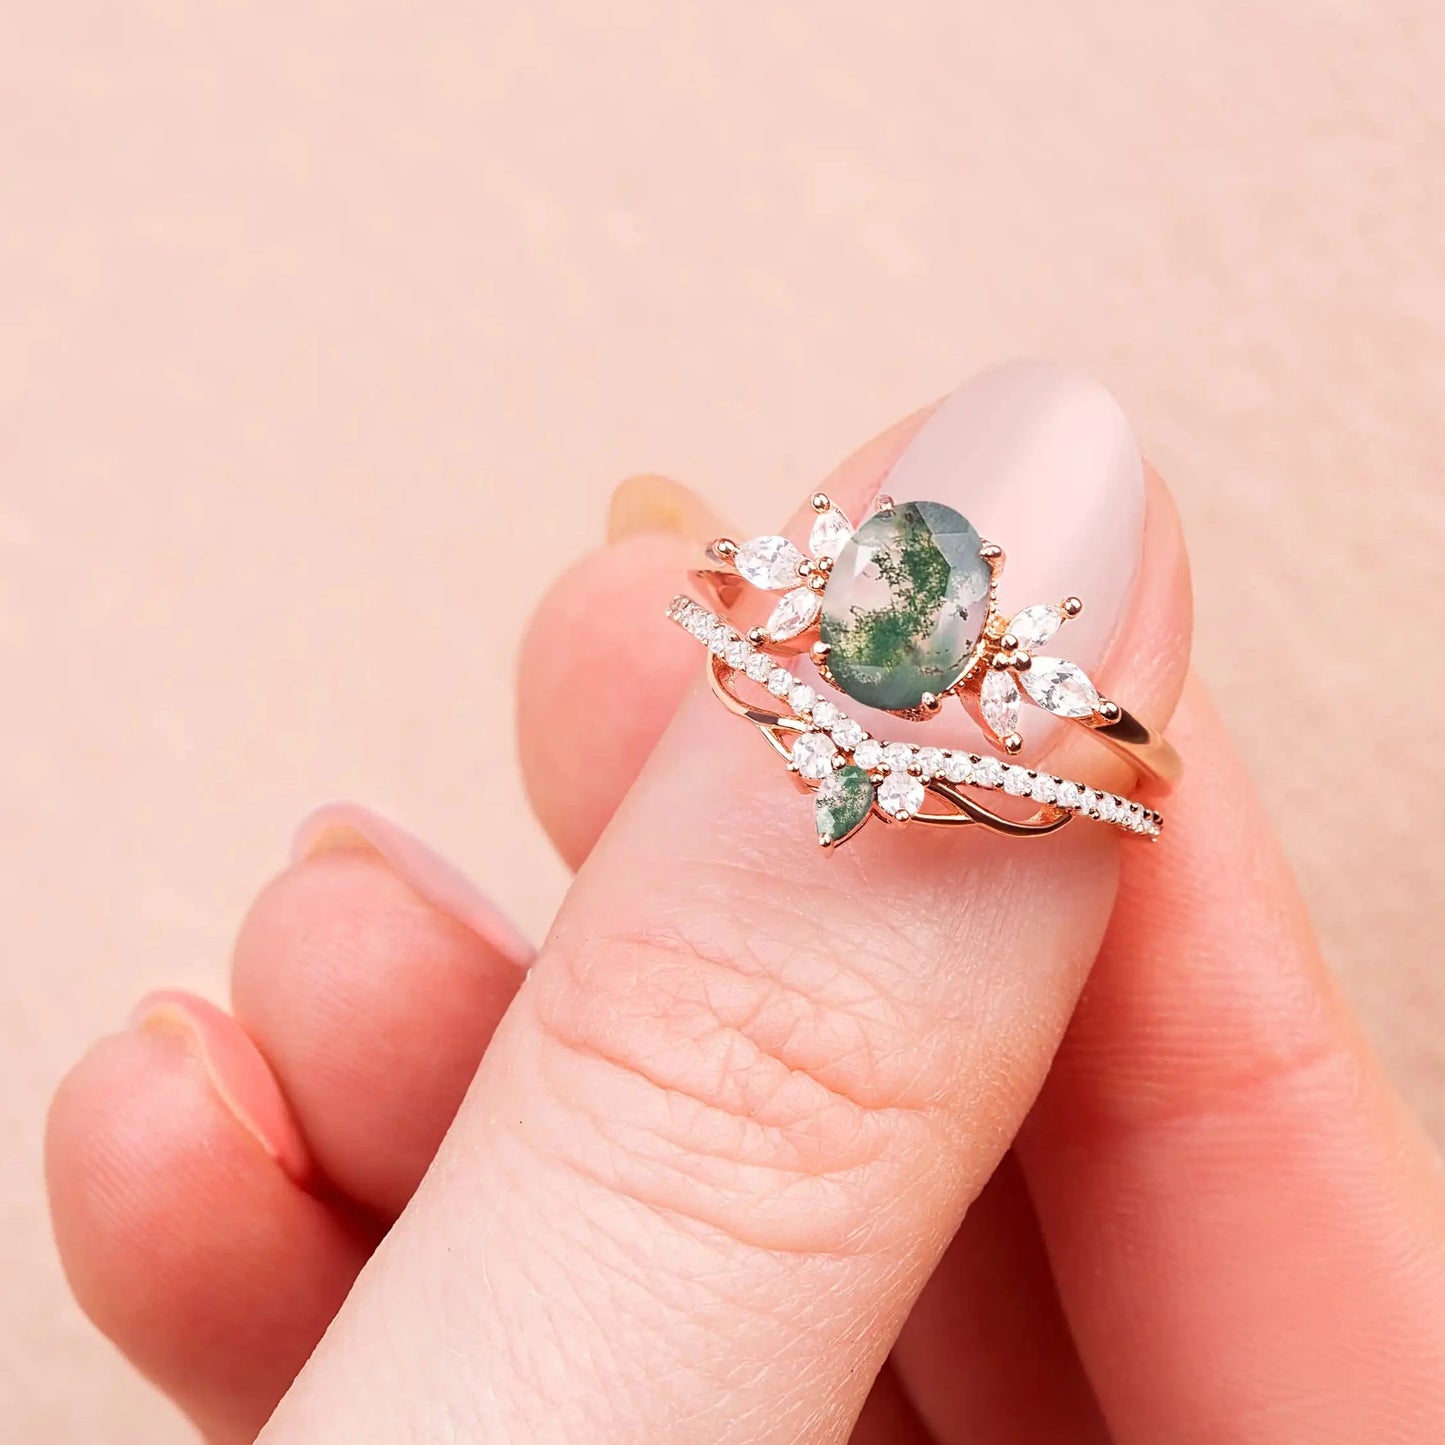 Ring set with Moss Agate on a woman's finger